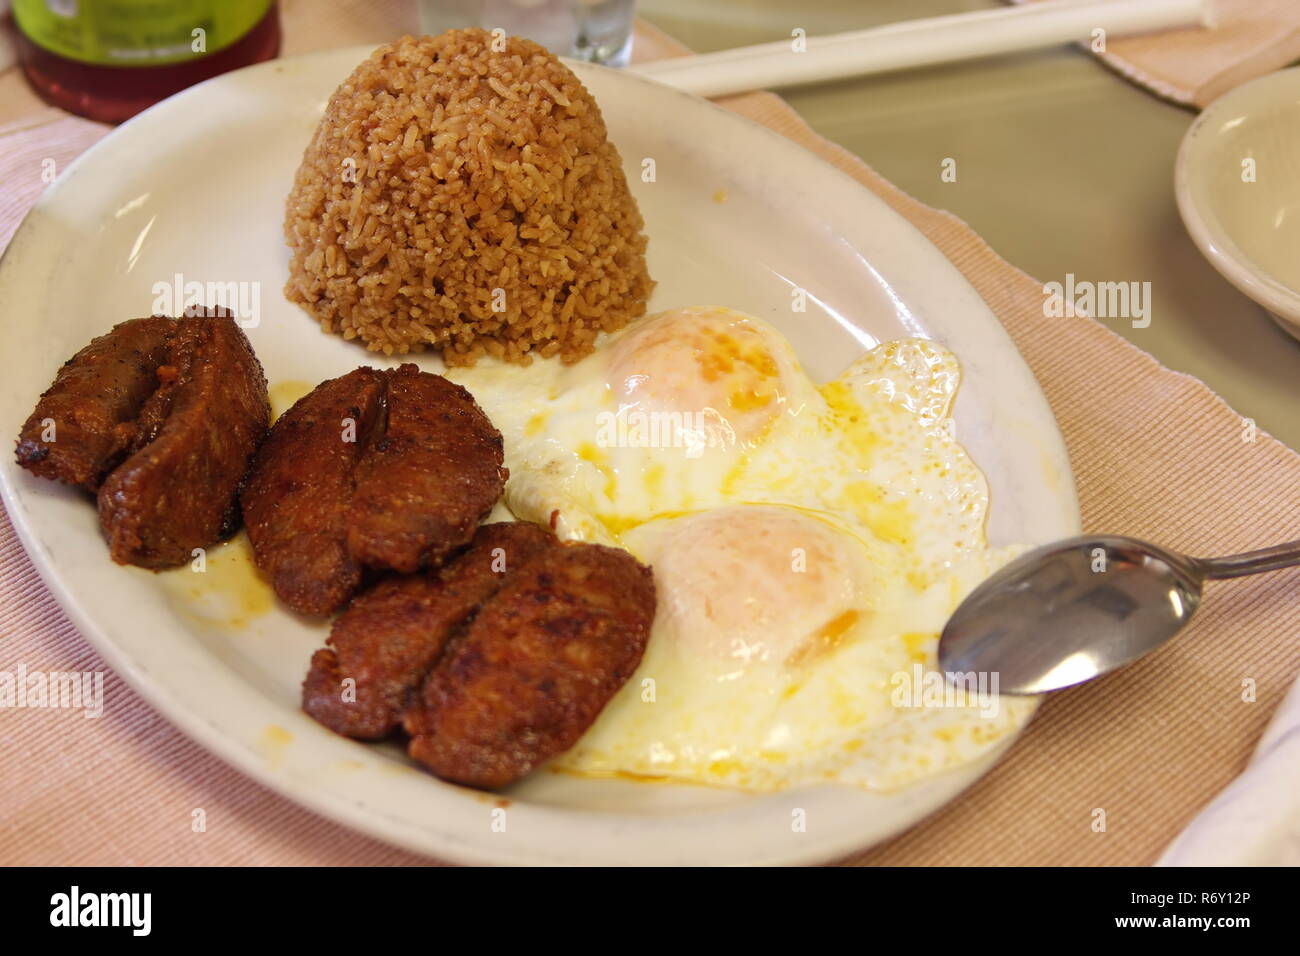 Typical Filipino breakfast of sausages, eggs, and fried rice. Stock Photo